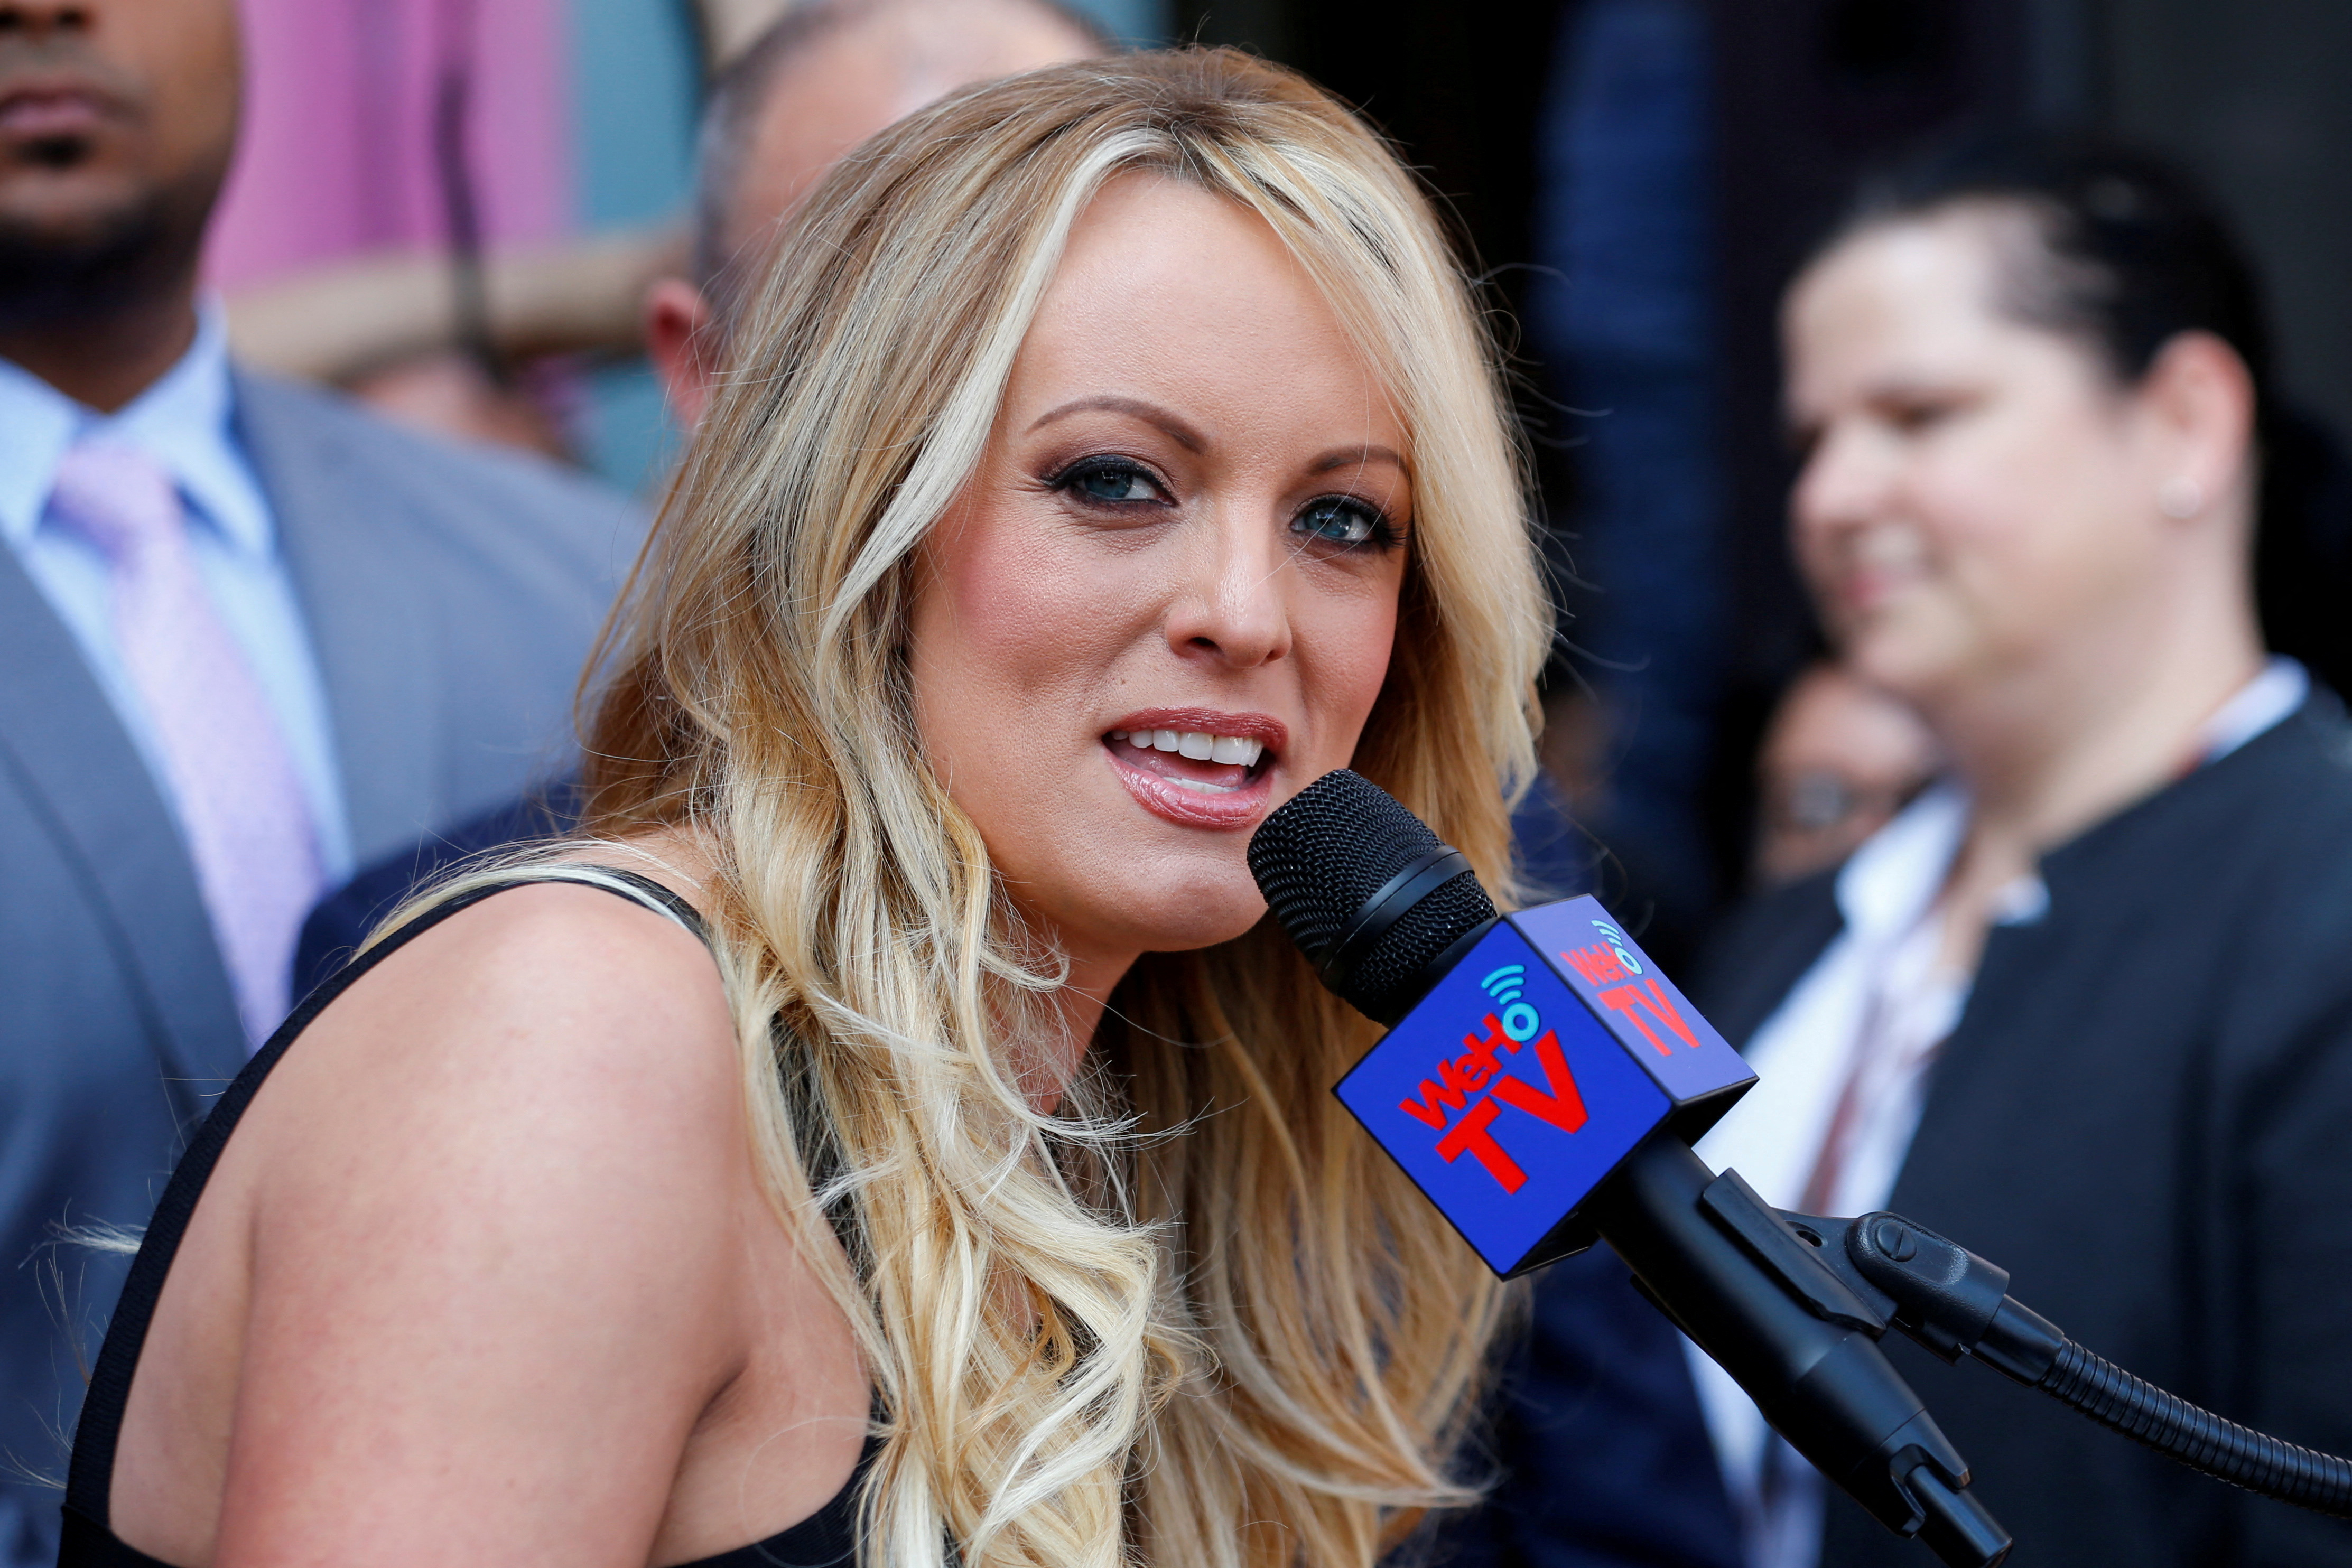 Who is Stormy Daniels and how is she involved in the Donald Trump indictment? Reuters pic